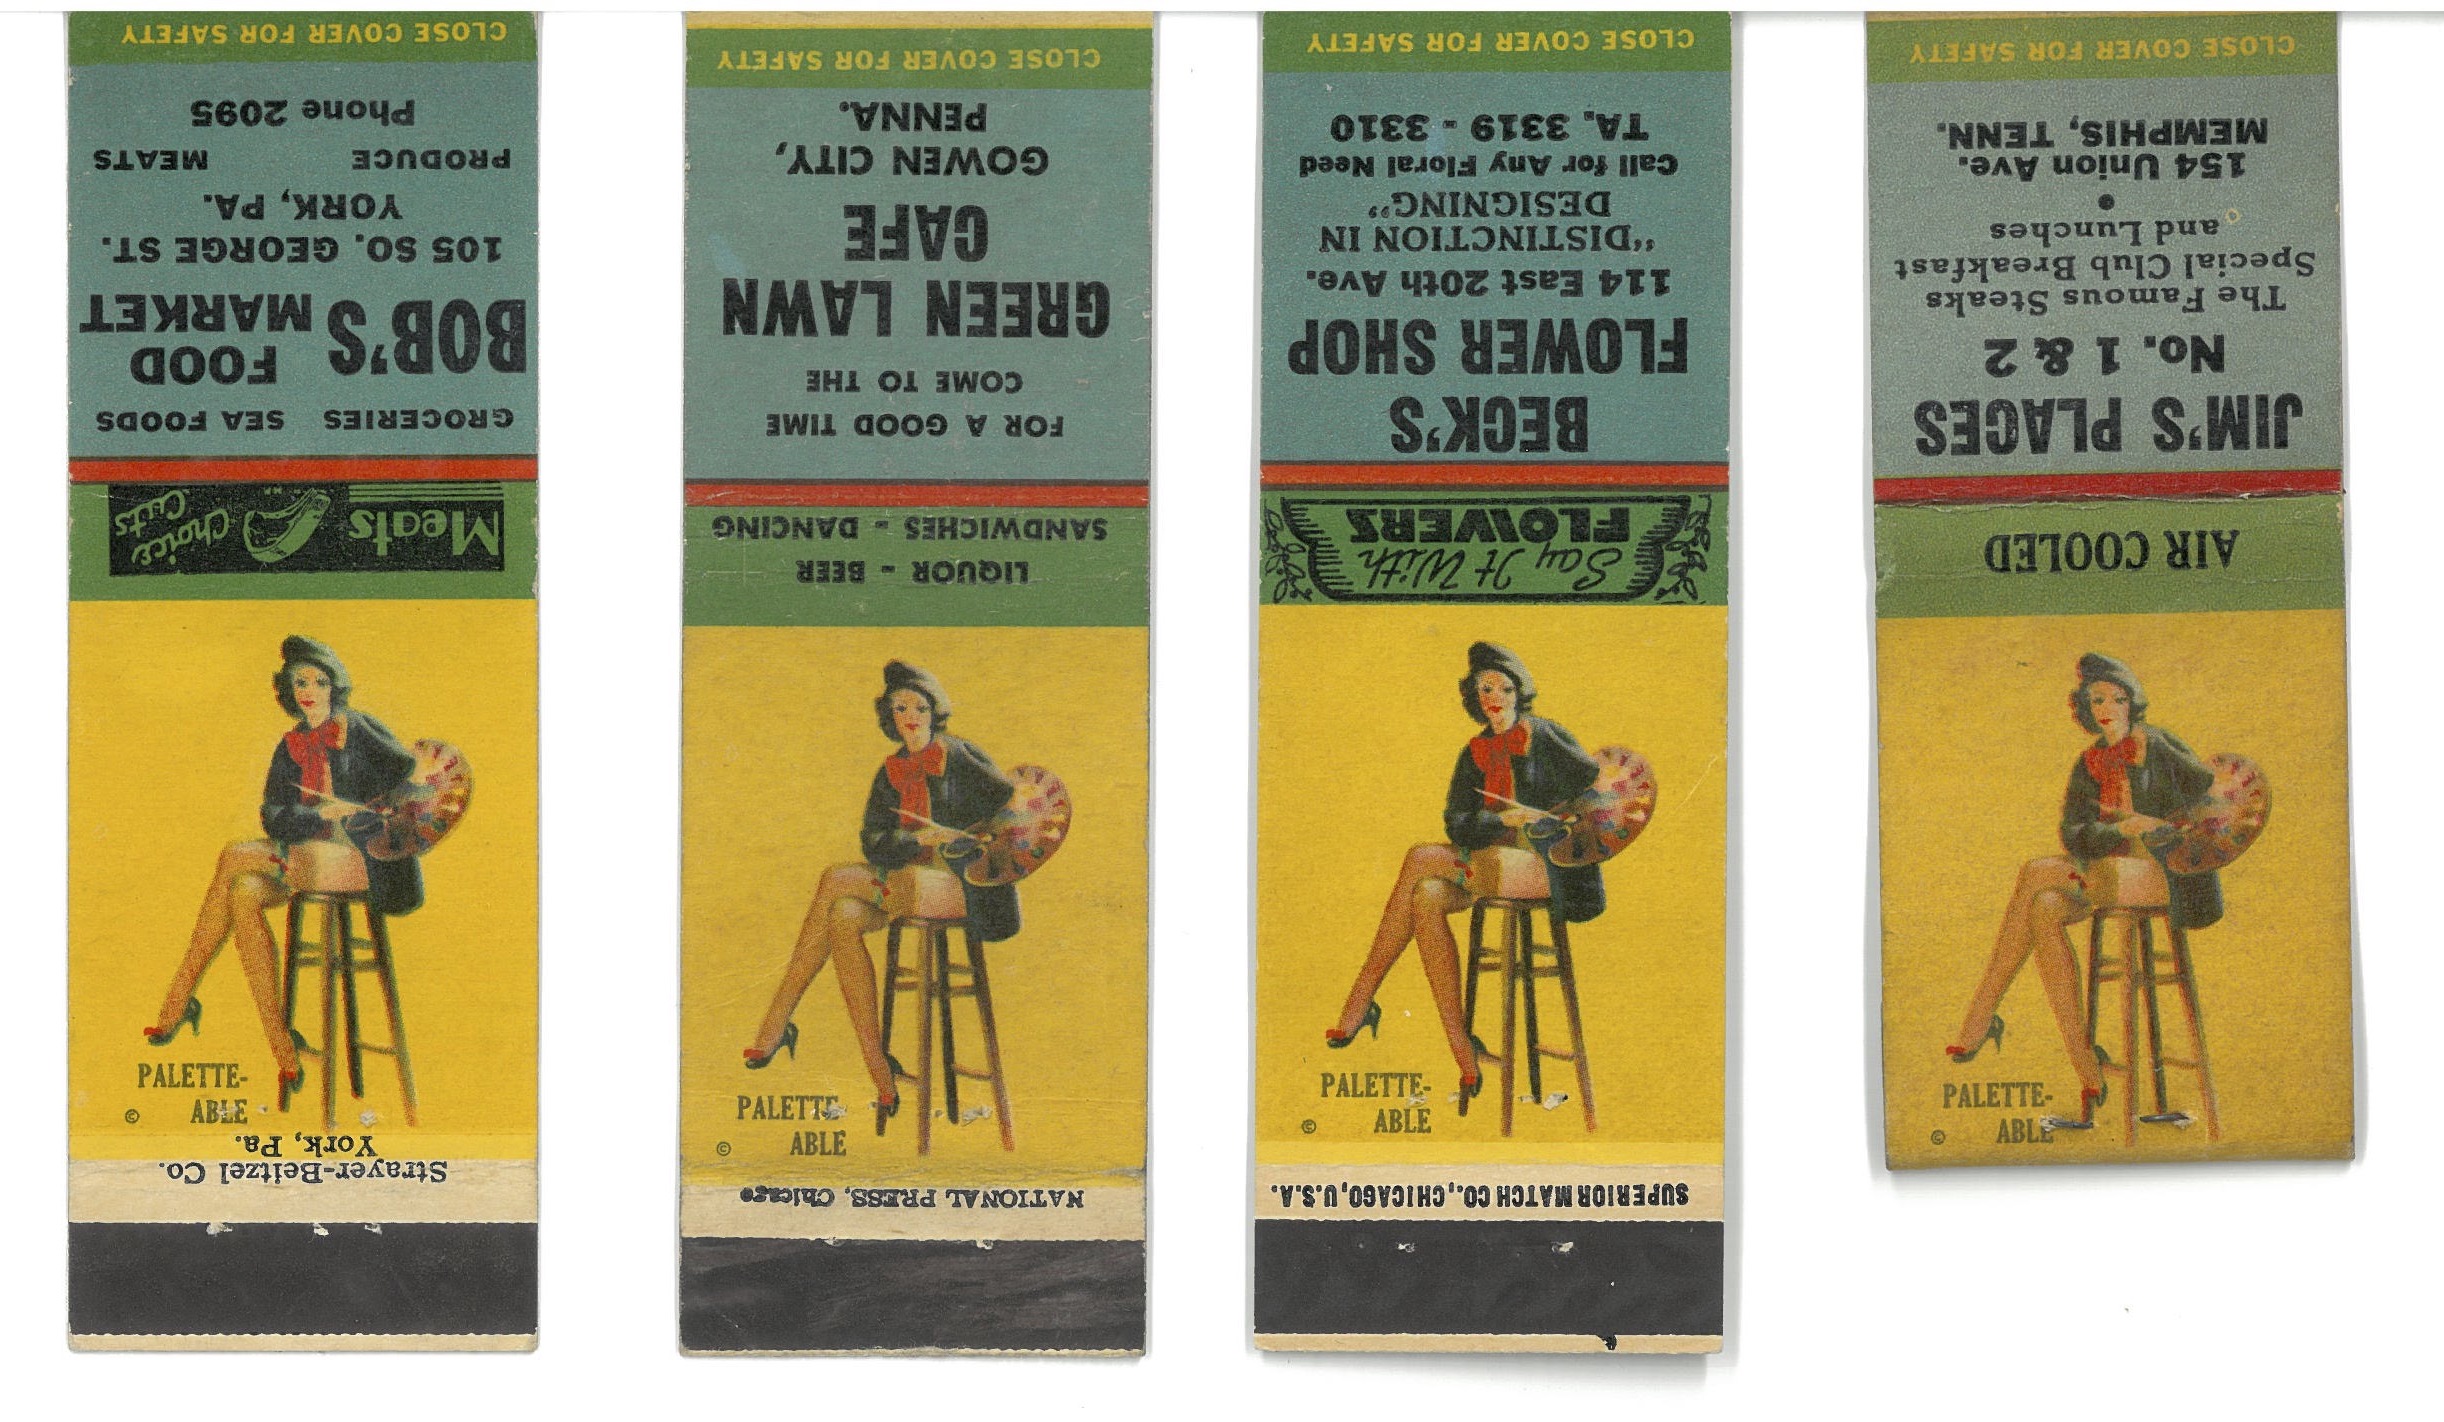 Four unfolded matchbooks, each showing the image from fig. 6 along with an advertisement for different businesses.